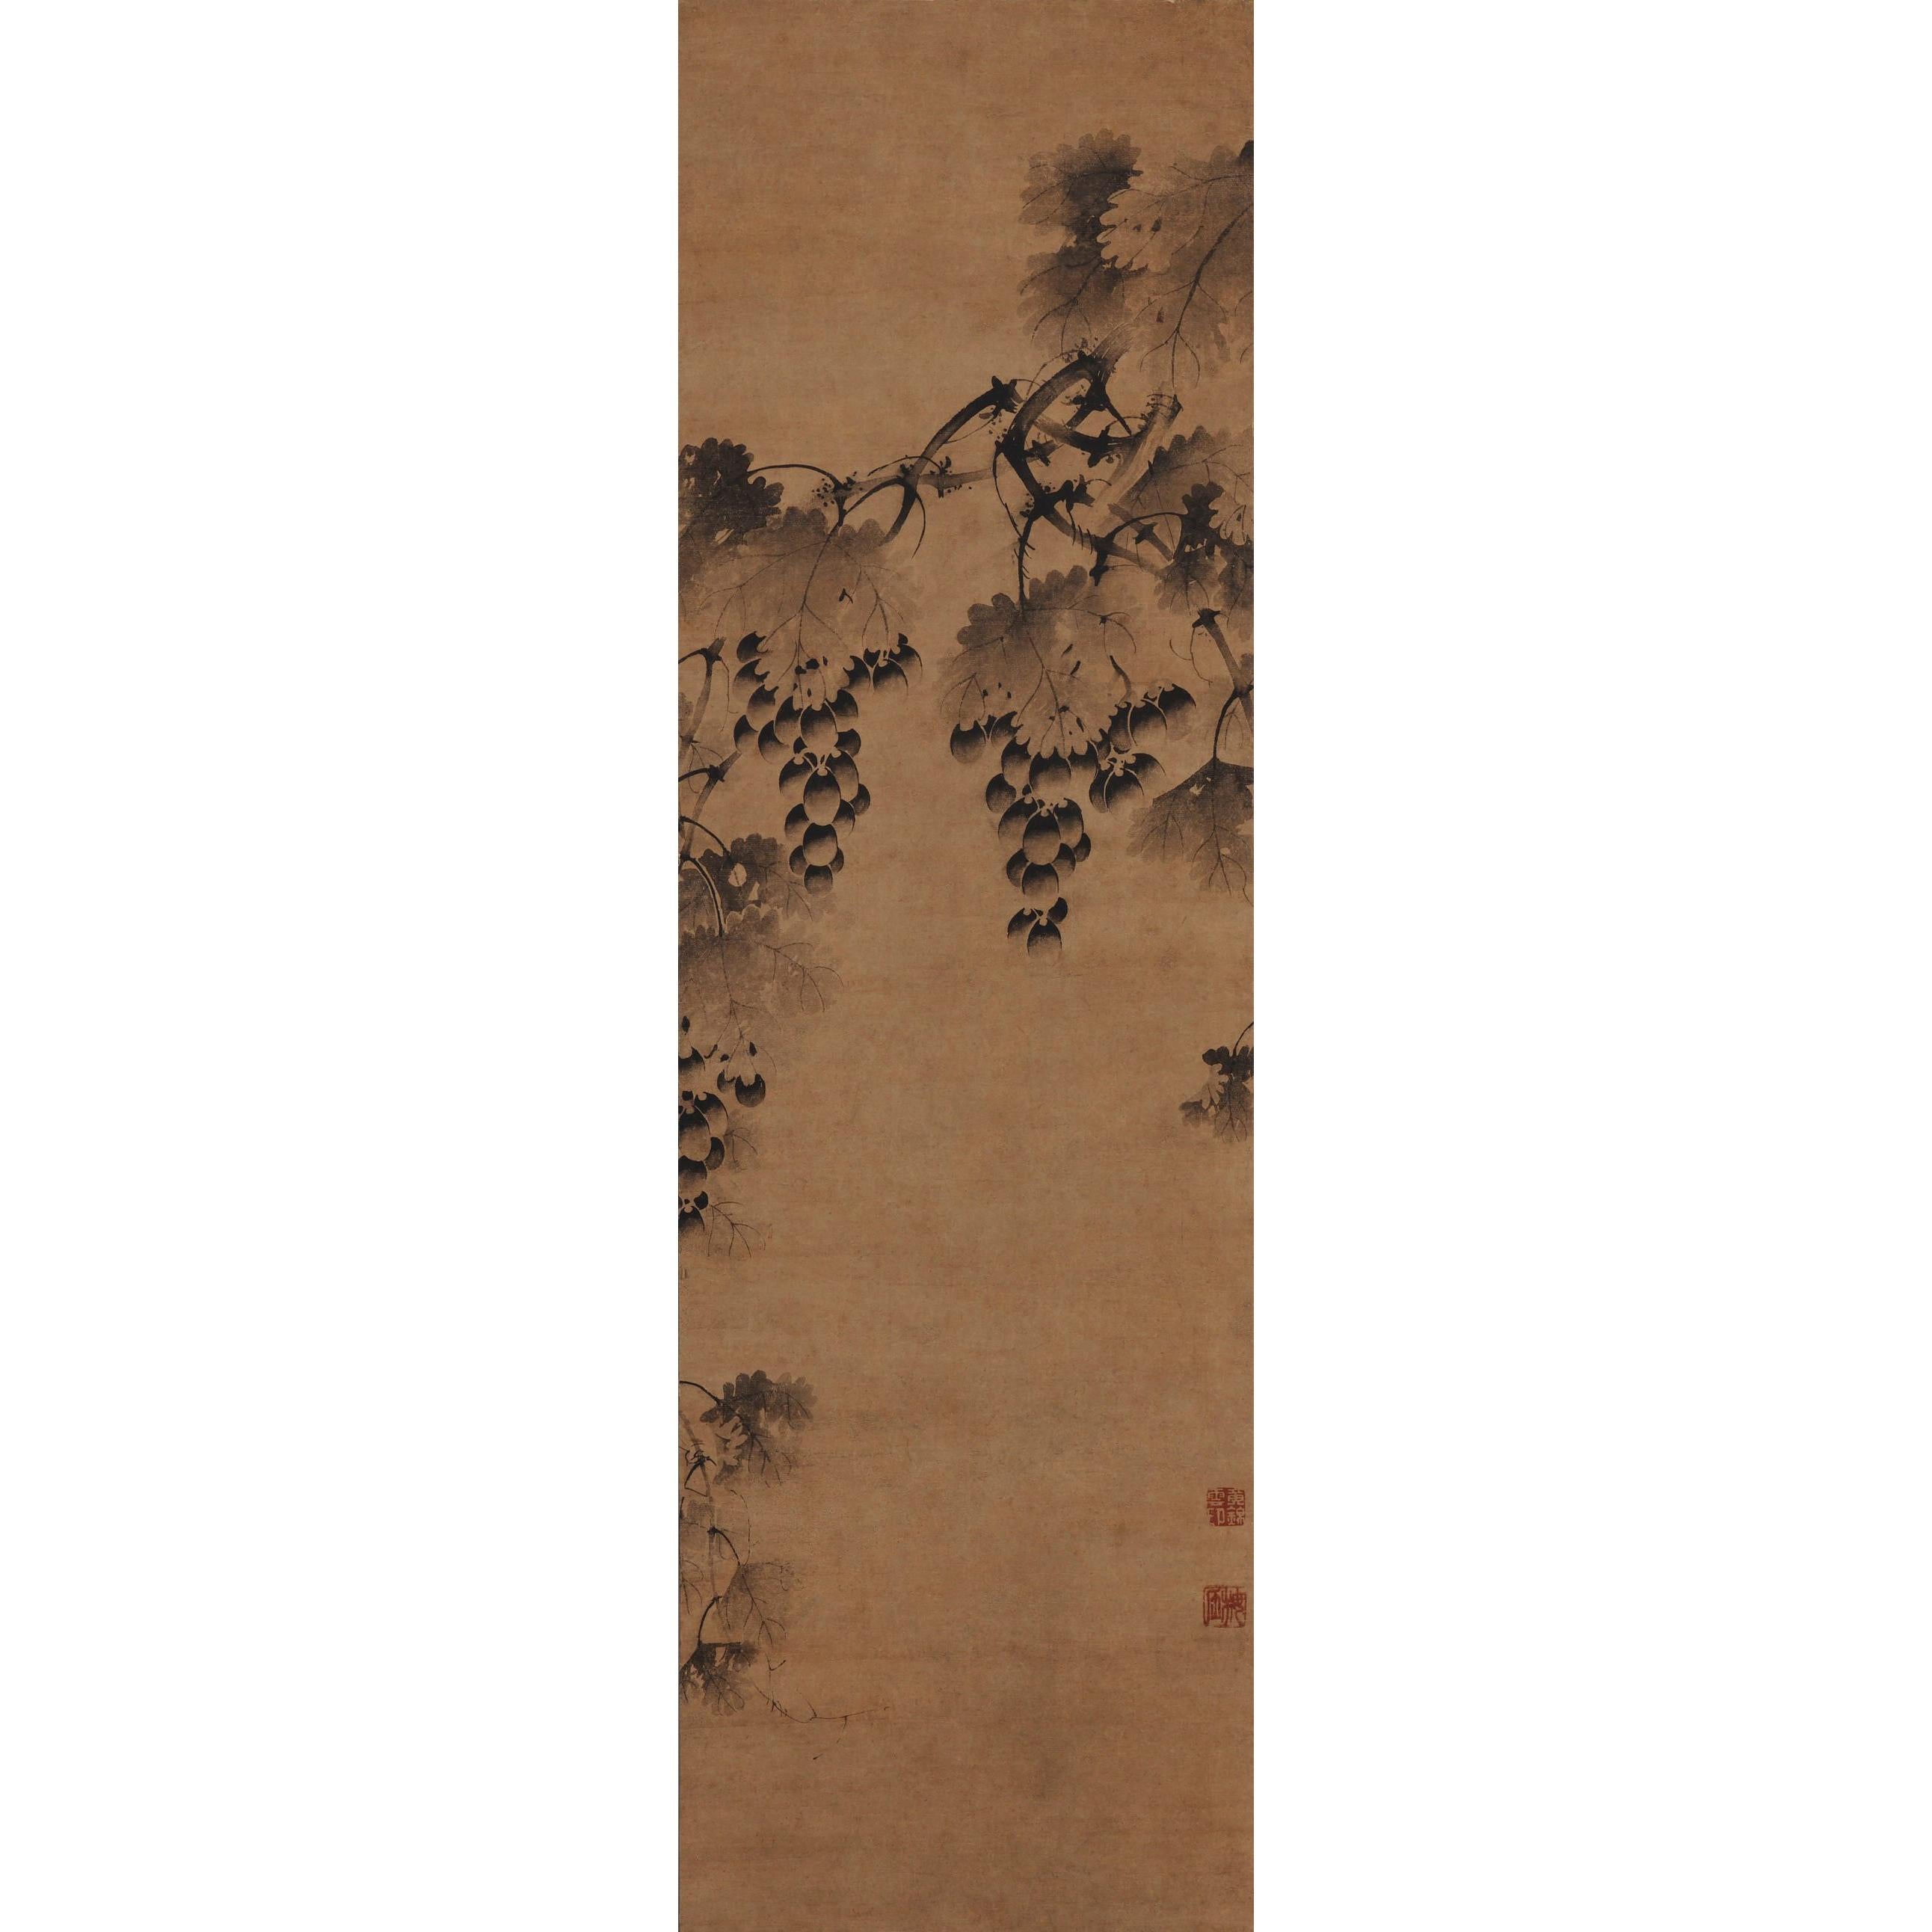 Korean Painting, Wall Panel, 17th Century Ink Grapevine